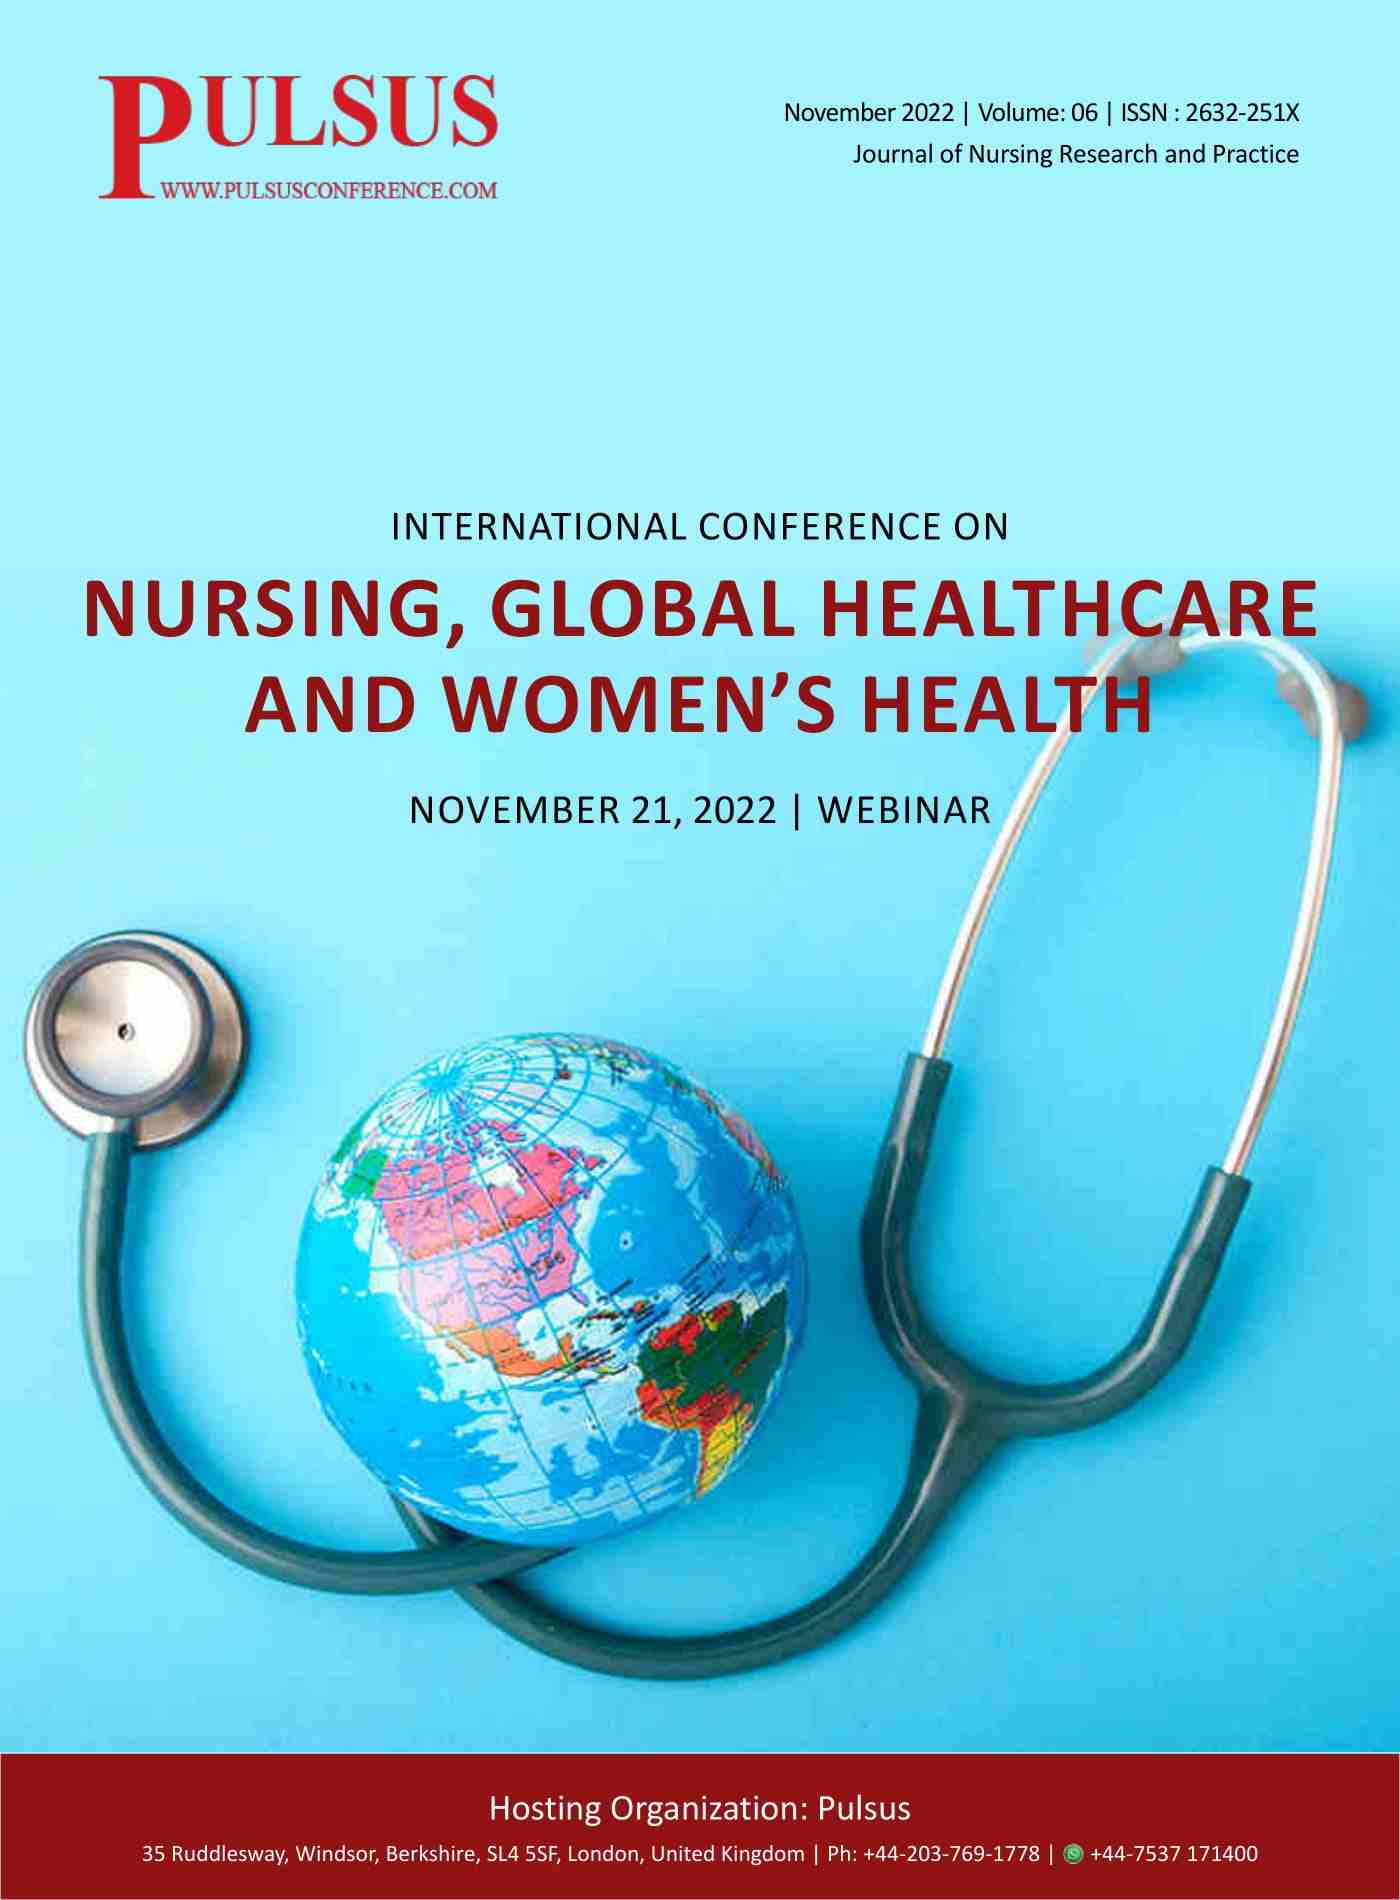 https://www.pulsus.com/conference-abstracts/world-congress-nursing-2022-proceedings.html